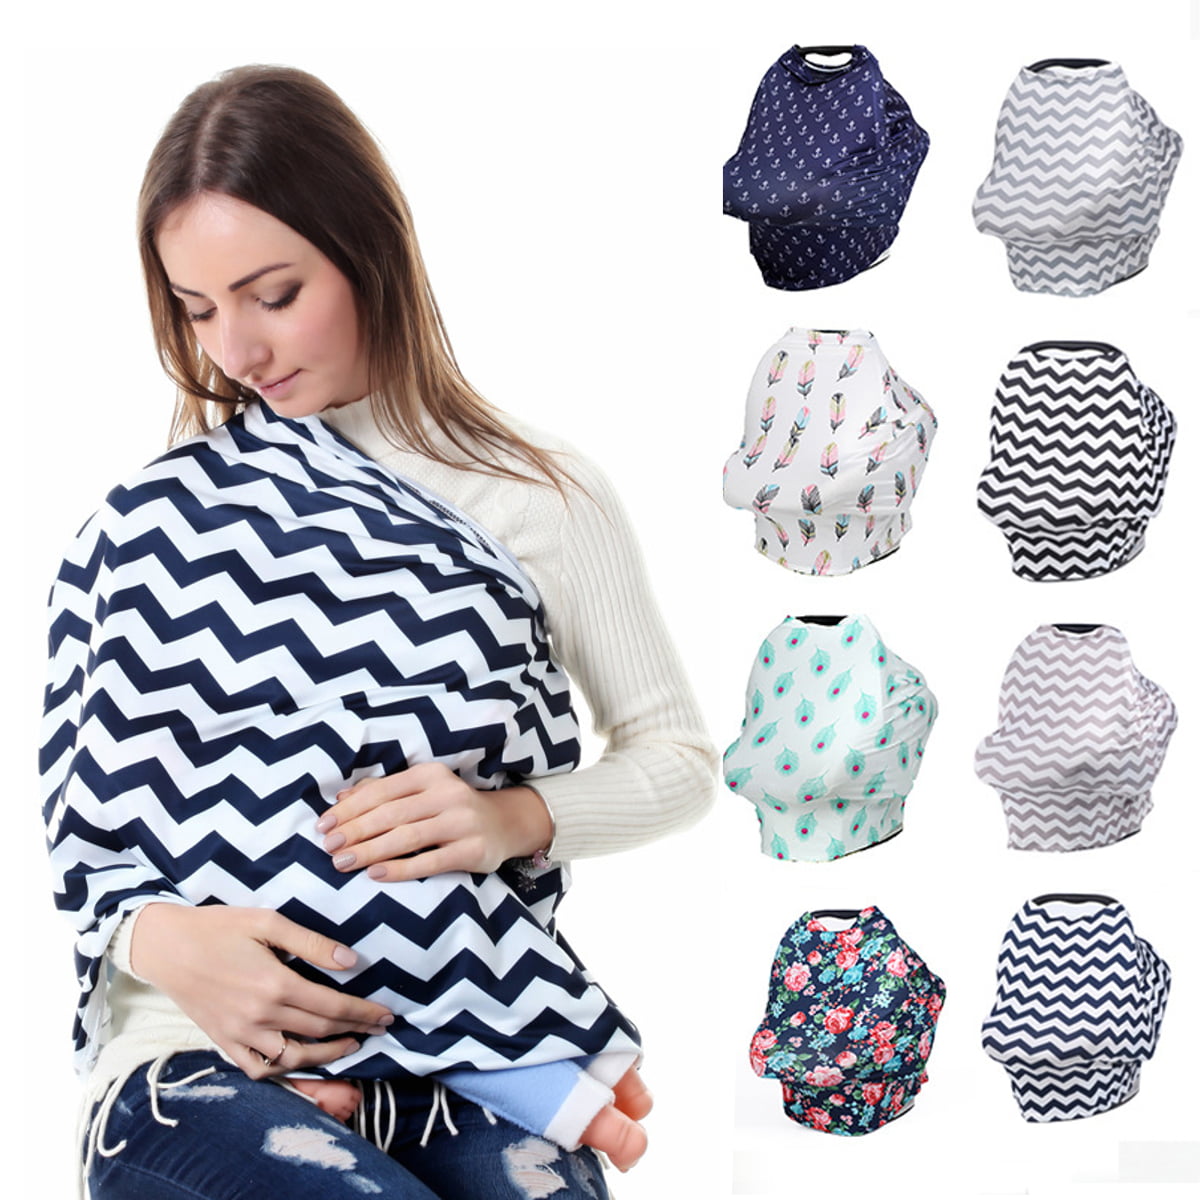 Breastfeeding Scarf with Sewn in Burp Cloth,Multi Use for Baby Car Seat,Covers Light Blanket Stroller Cover Metene Nursing Cover for Breastfeeding Infants